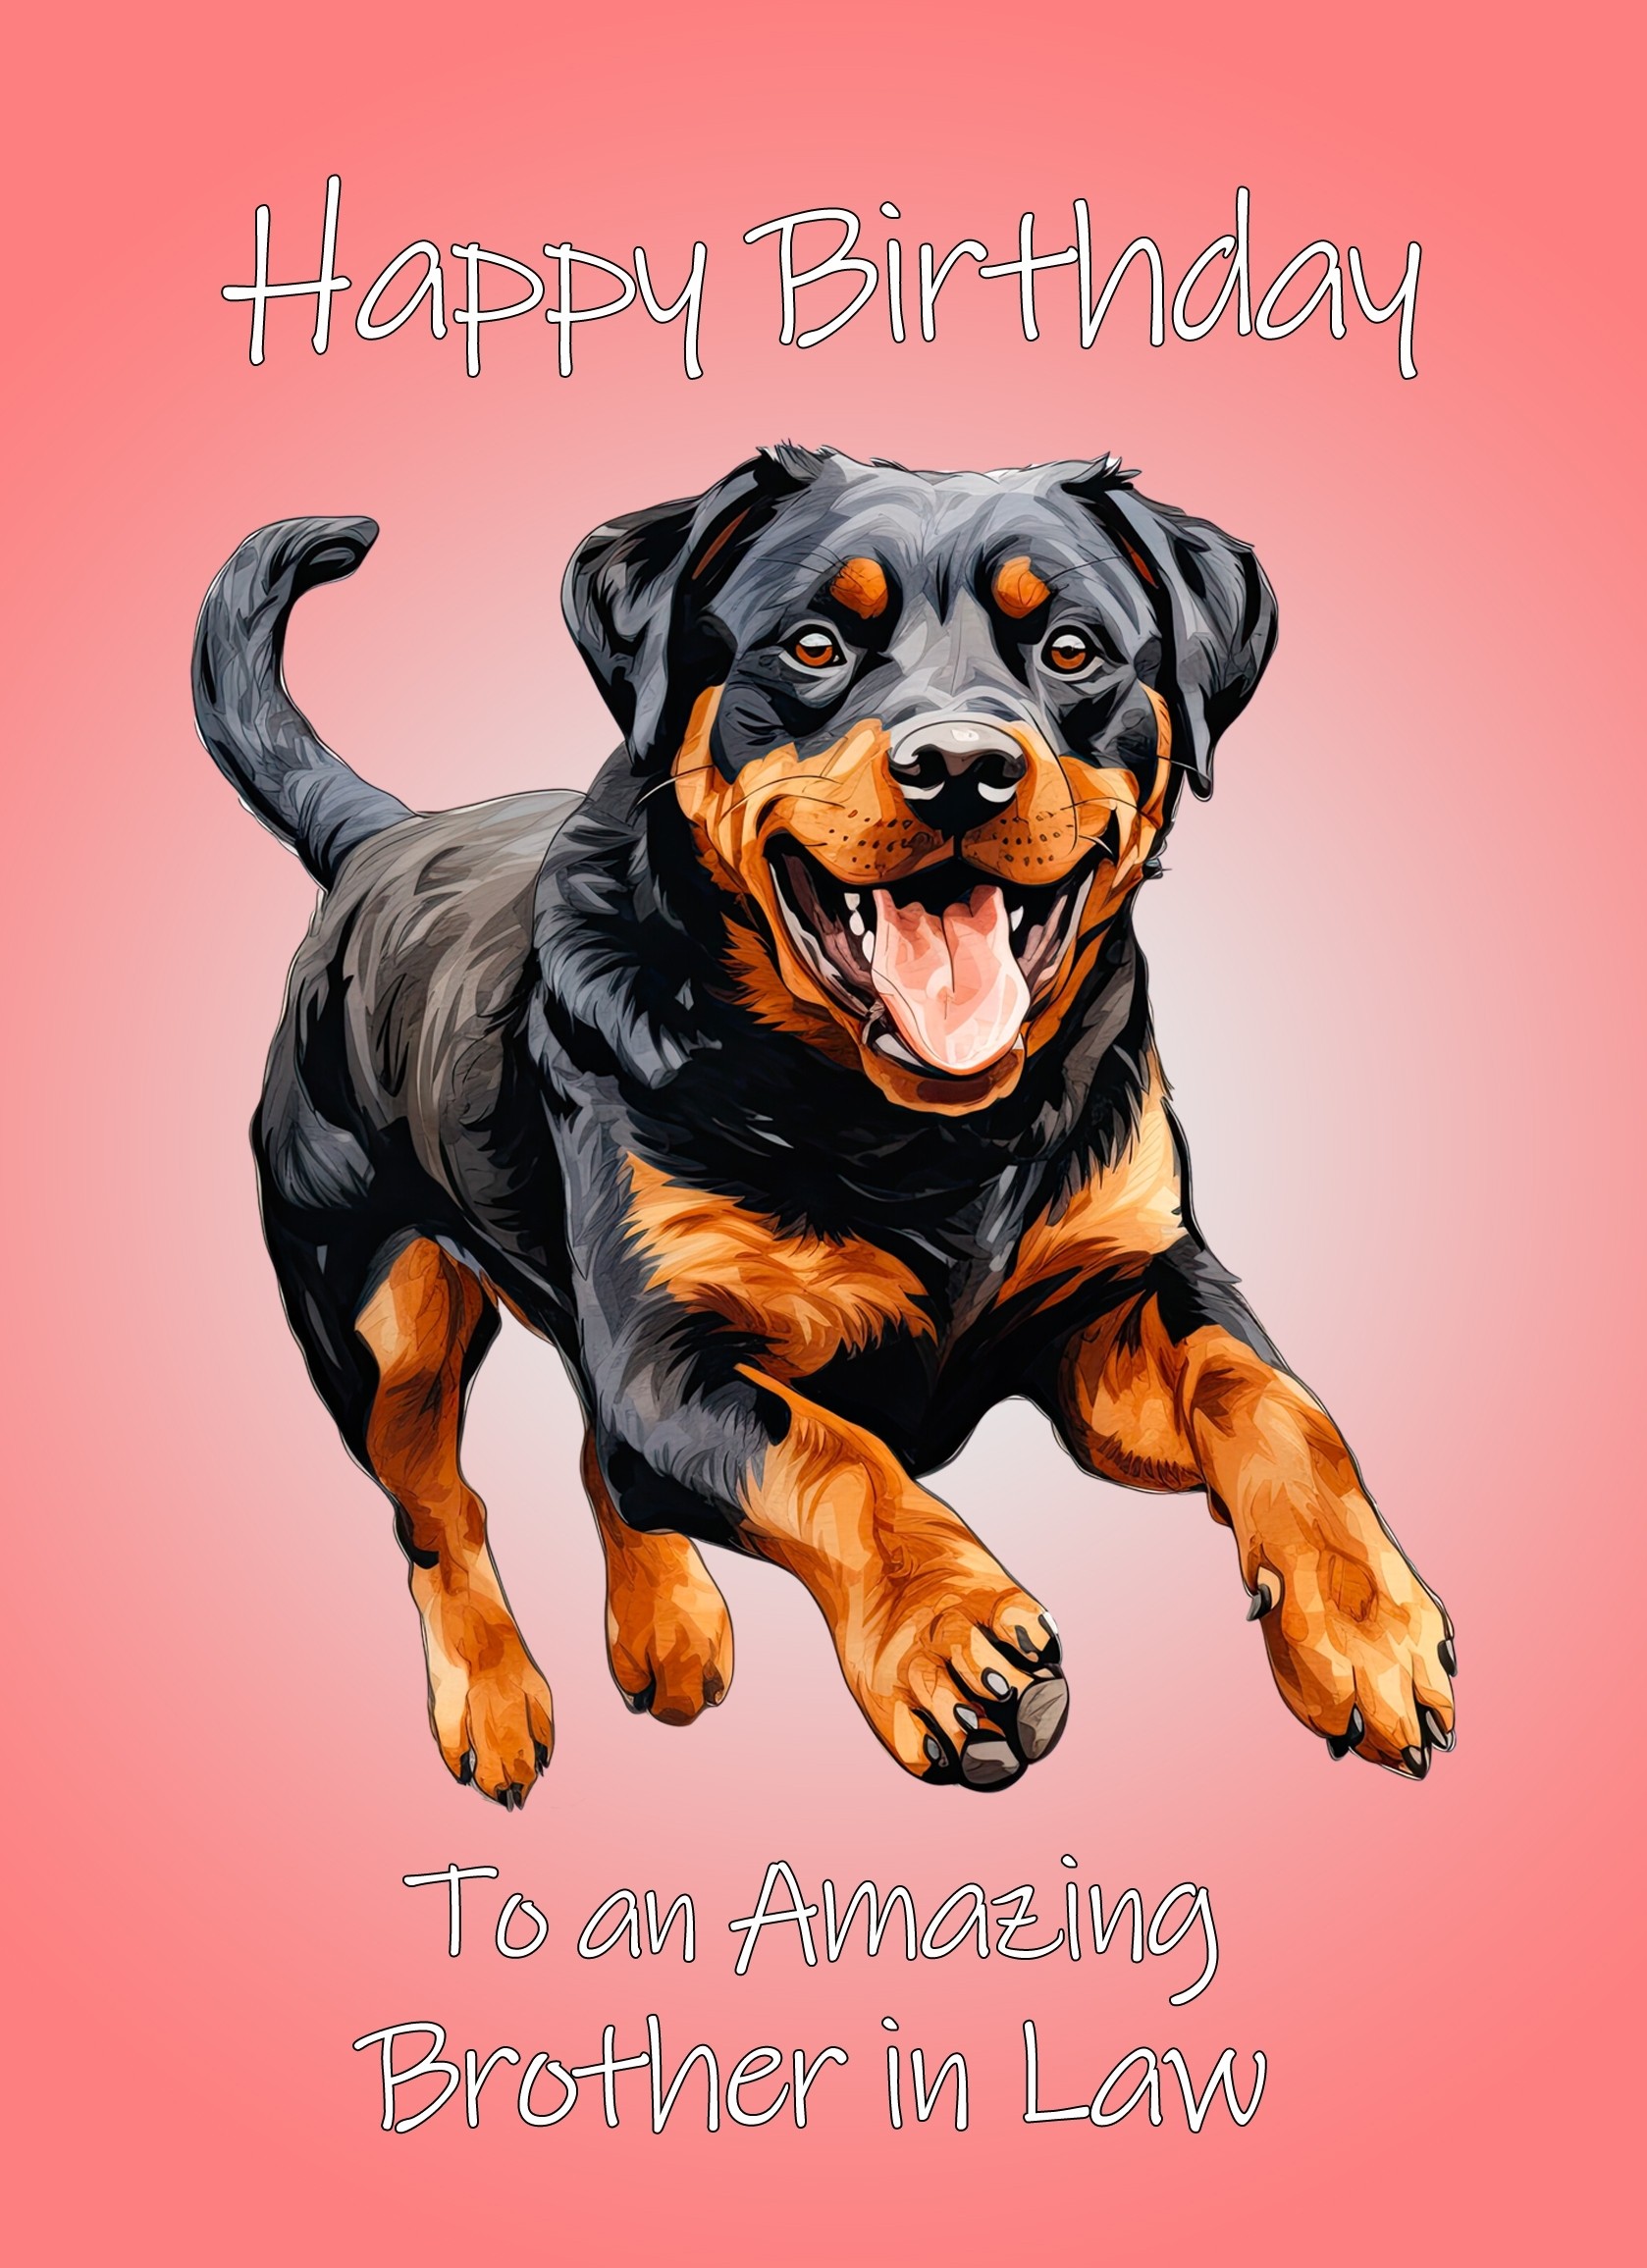 Rottweiler Dog Birthday Card For Brother in Law